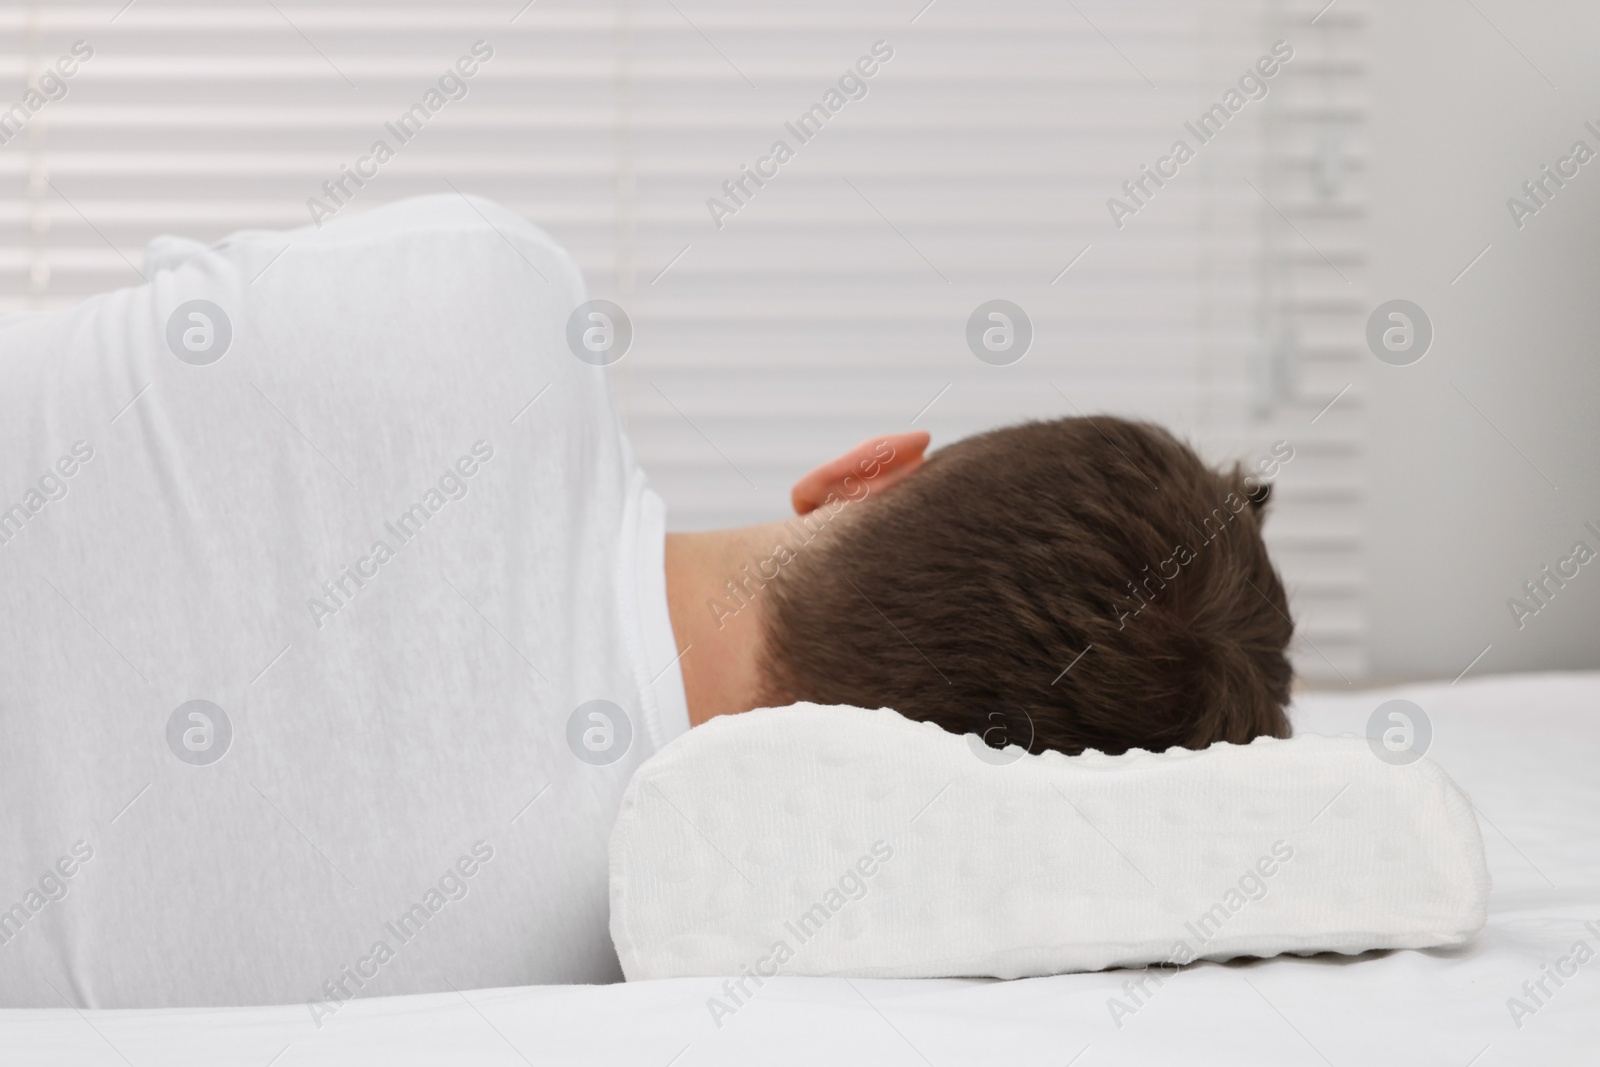 Photo of Man sleeping on orthopedic pillow at home